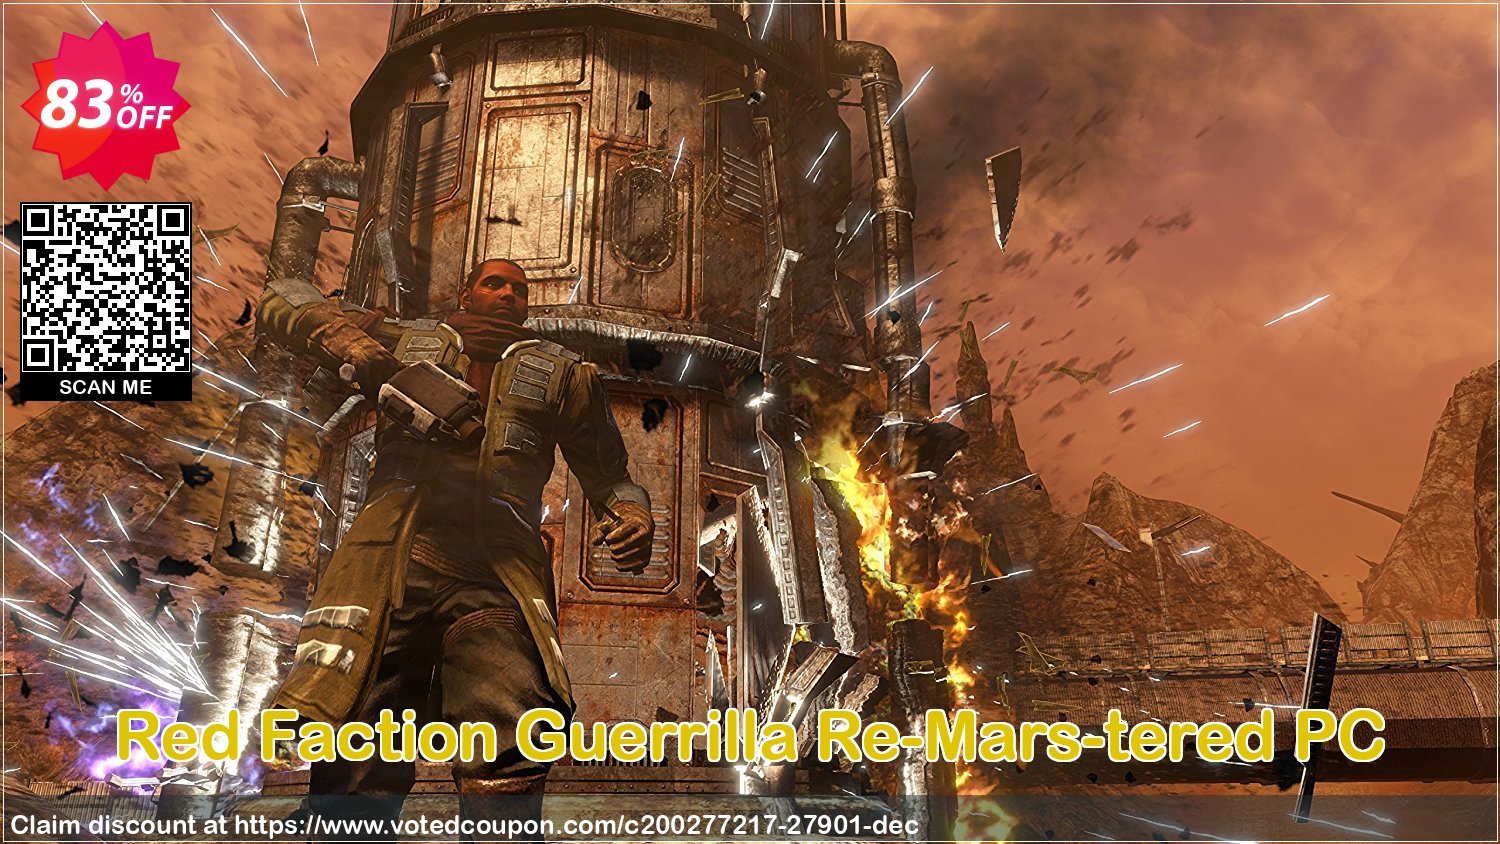 Red Faction Guerrilla Re-Mars-tered PC Coupon Code Apr 2024, 83% OFF - VotedCoupon